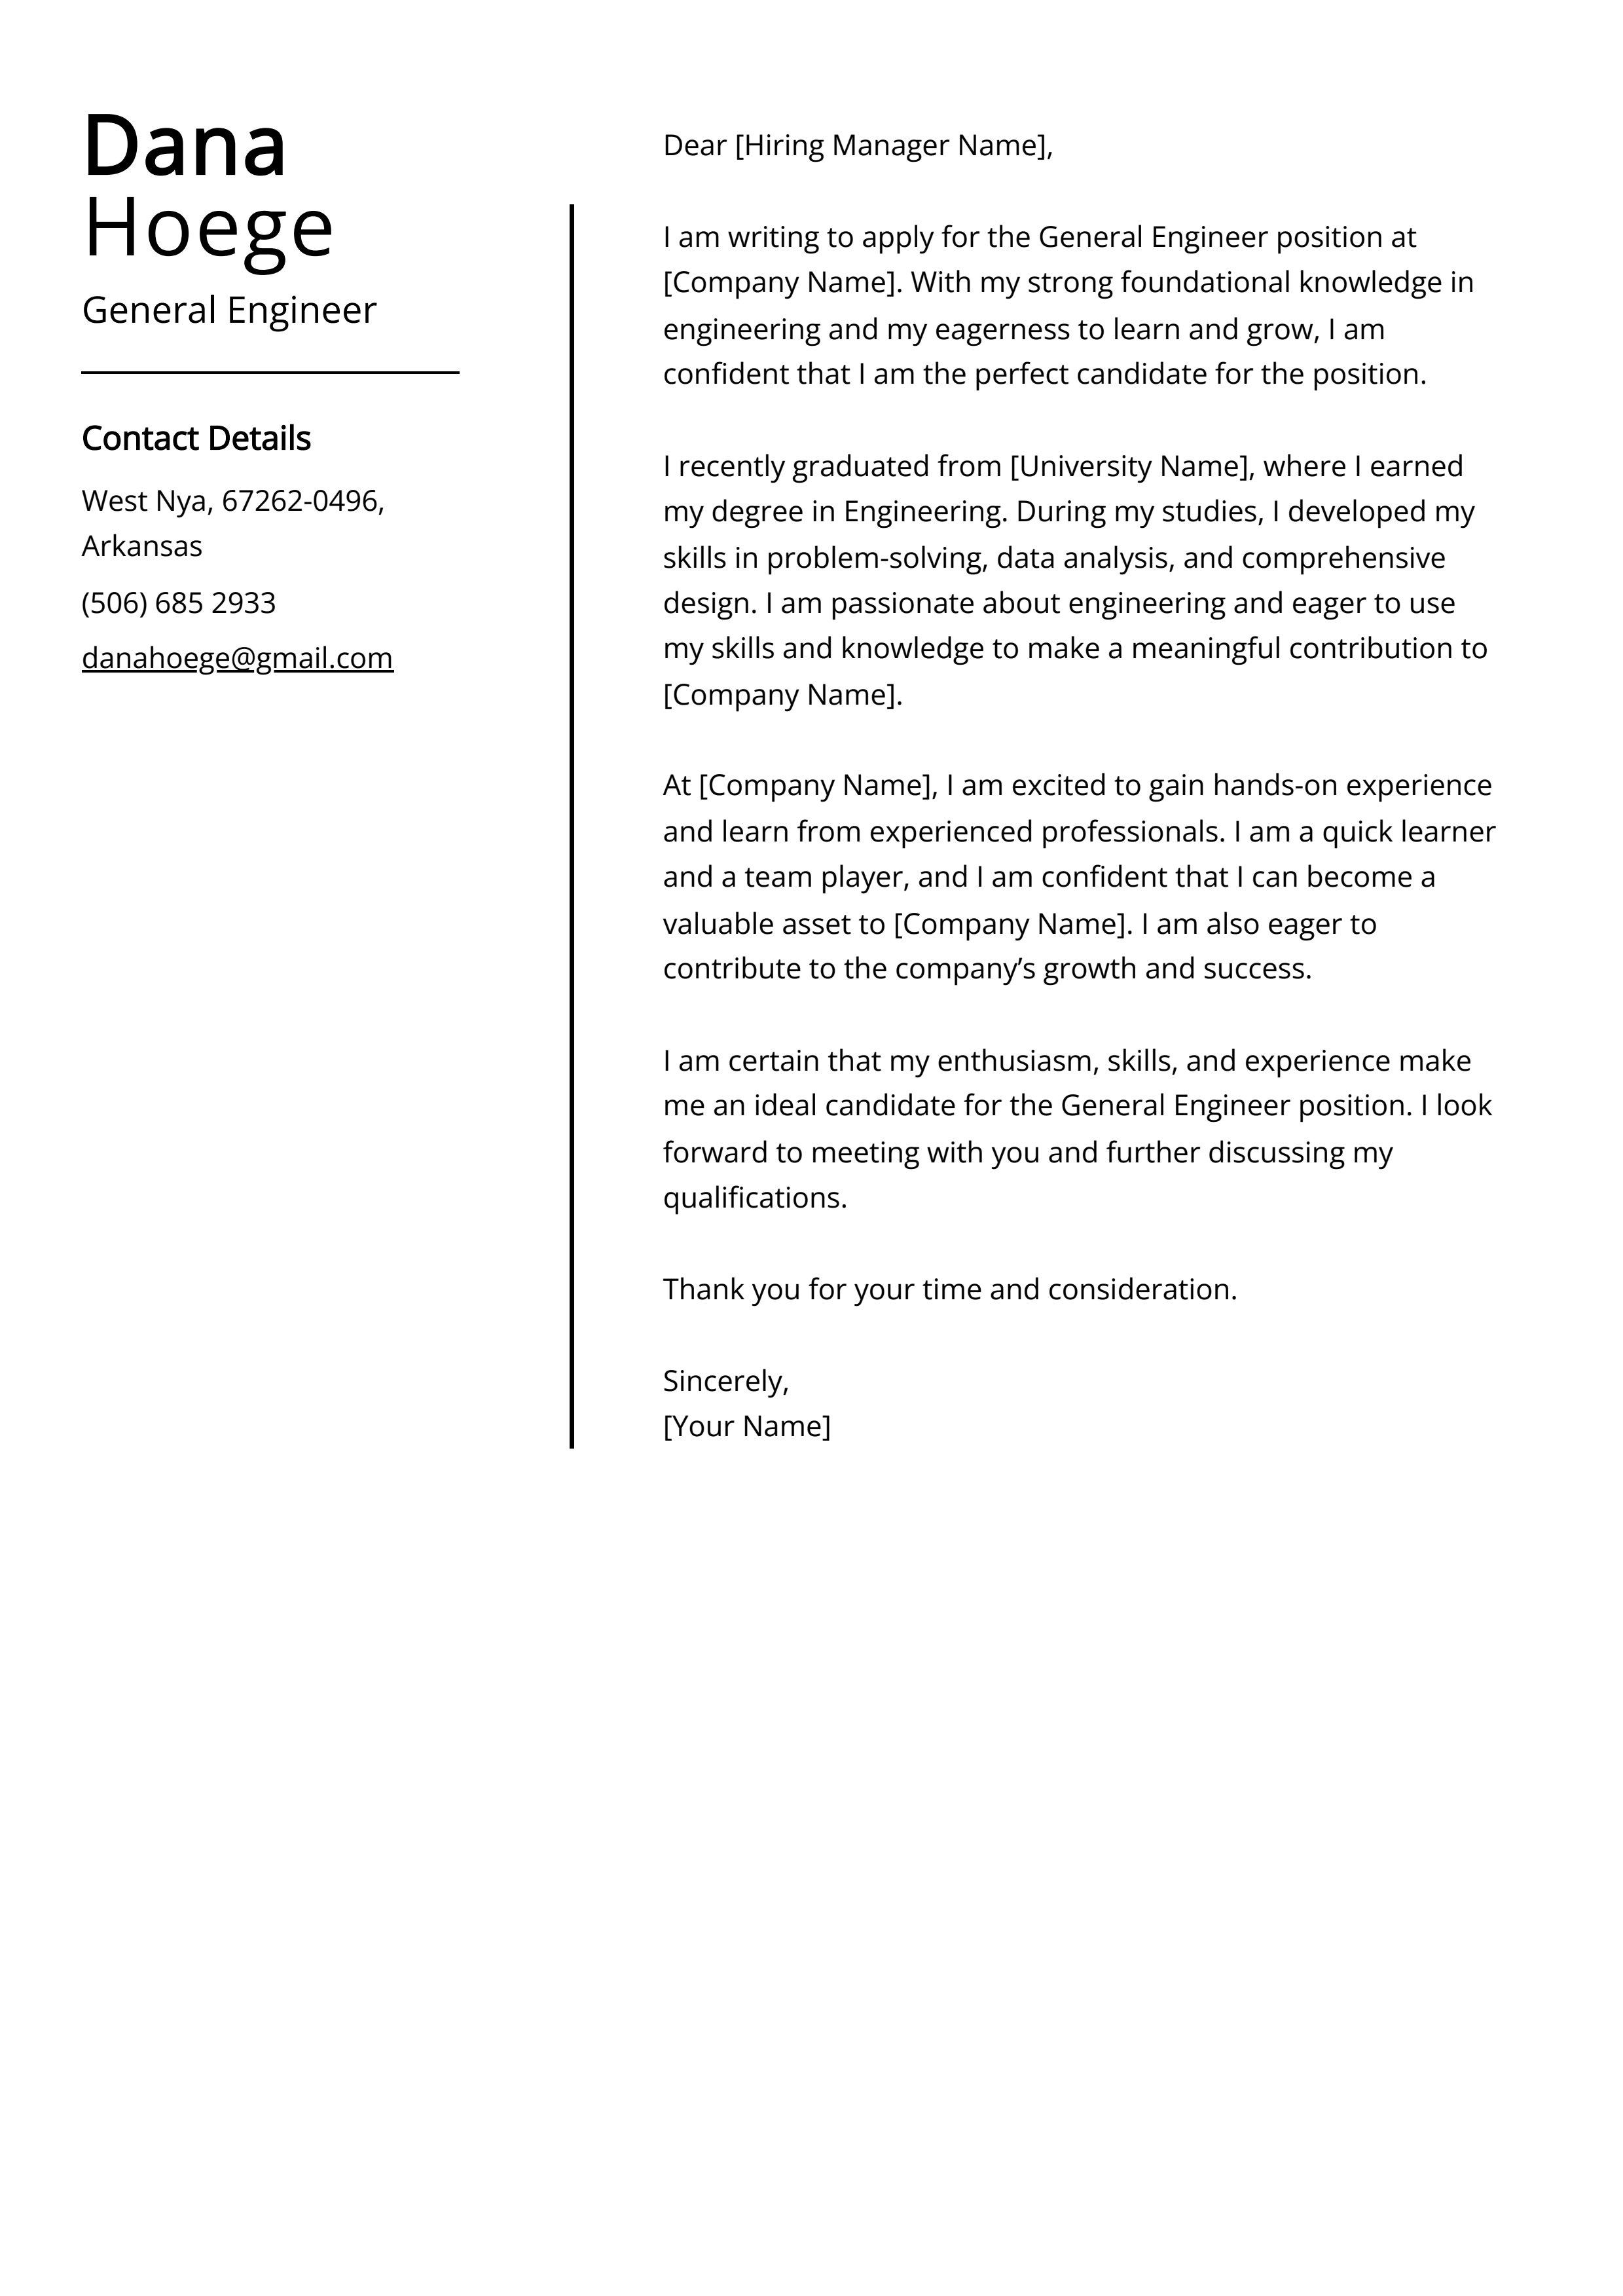 General Engineer Cover Letter Example